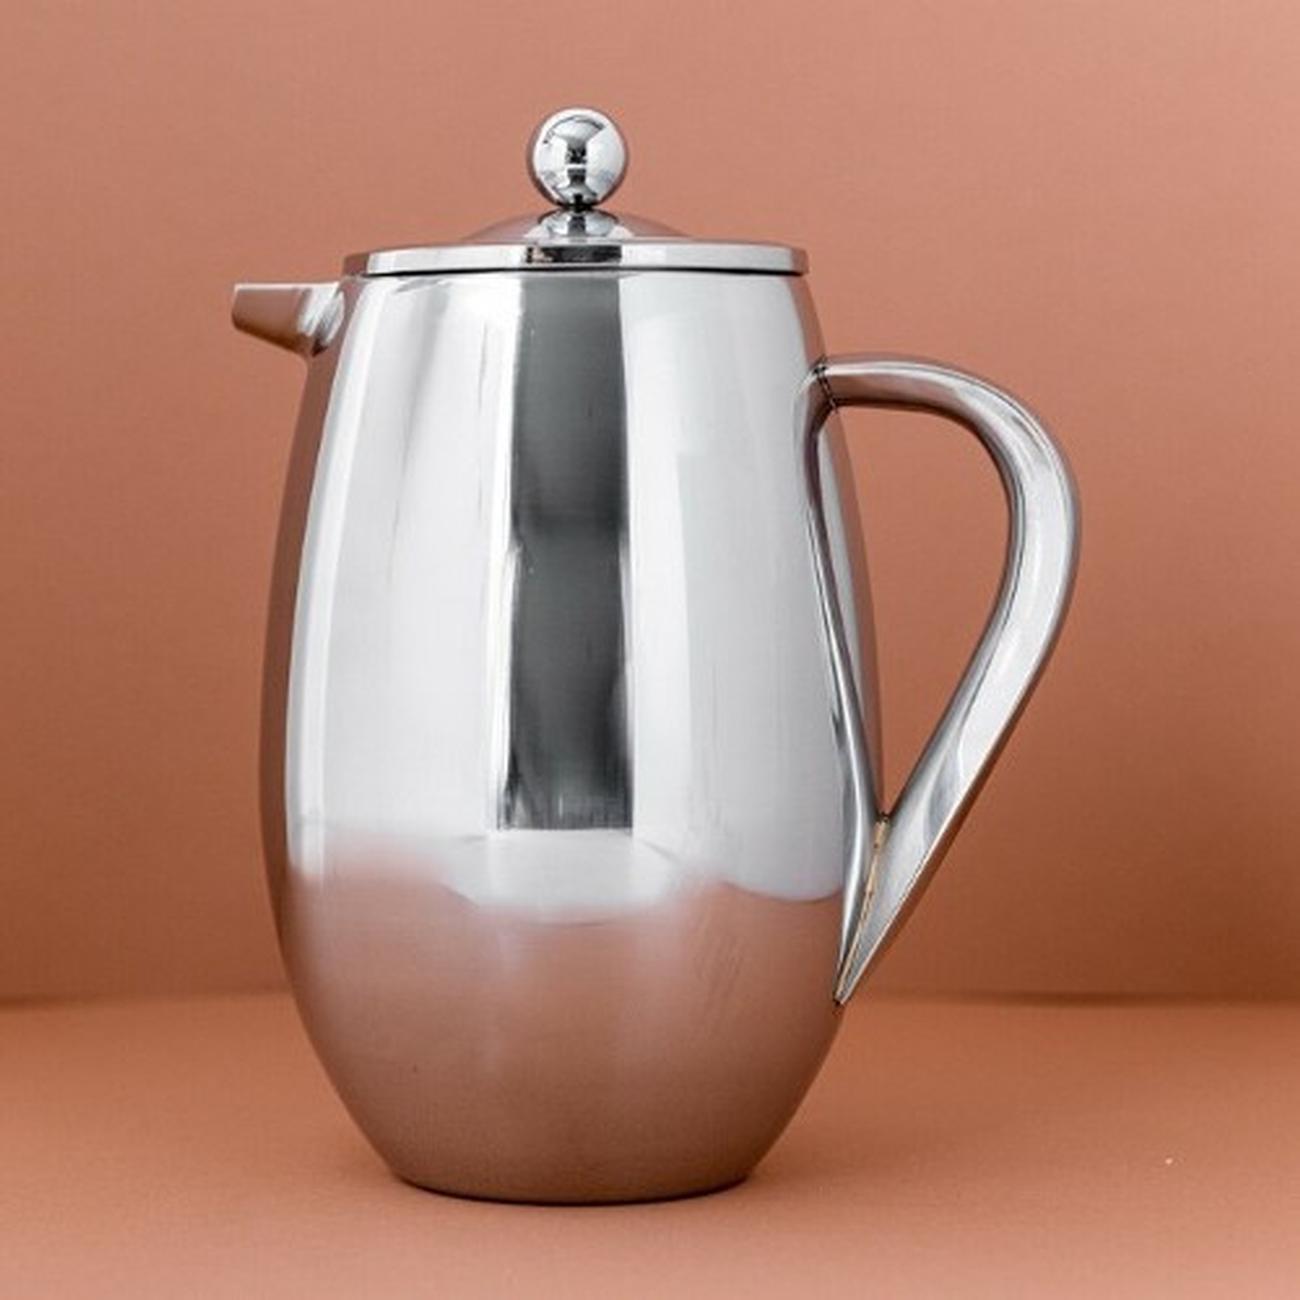 https://www.thekitchenwhisk.ie/contentfiles/productImages/Large/La-Cafetiere-Double-Walled-Stainless-Steel-Coffee-French-Press-8-cup-moodshot-1.jpg